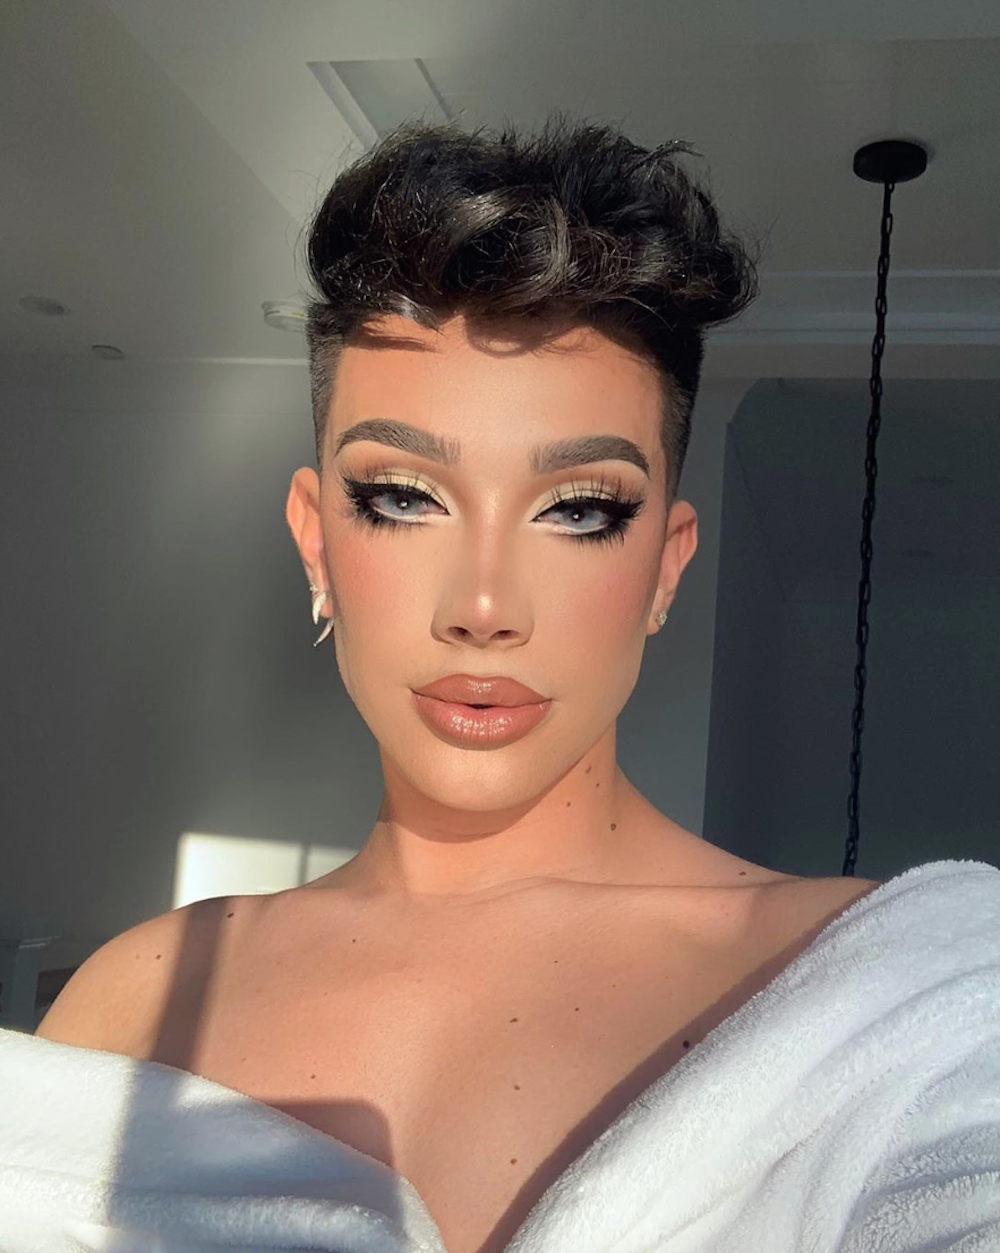 James charles nude uncensored